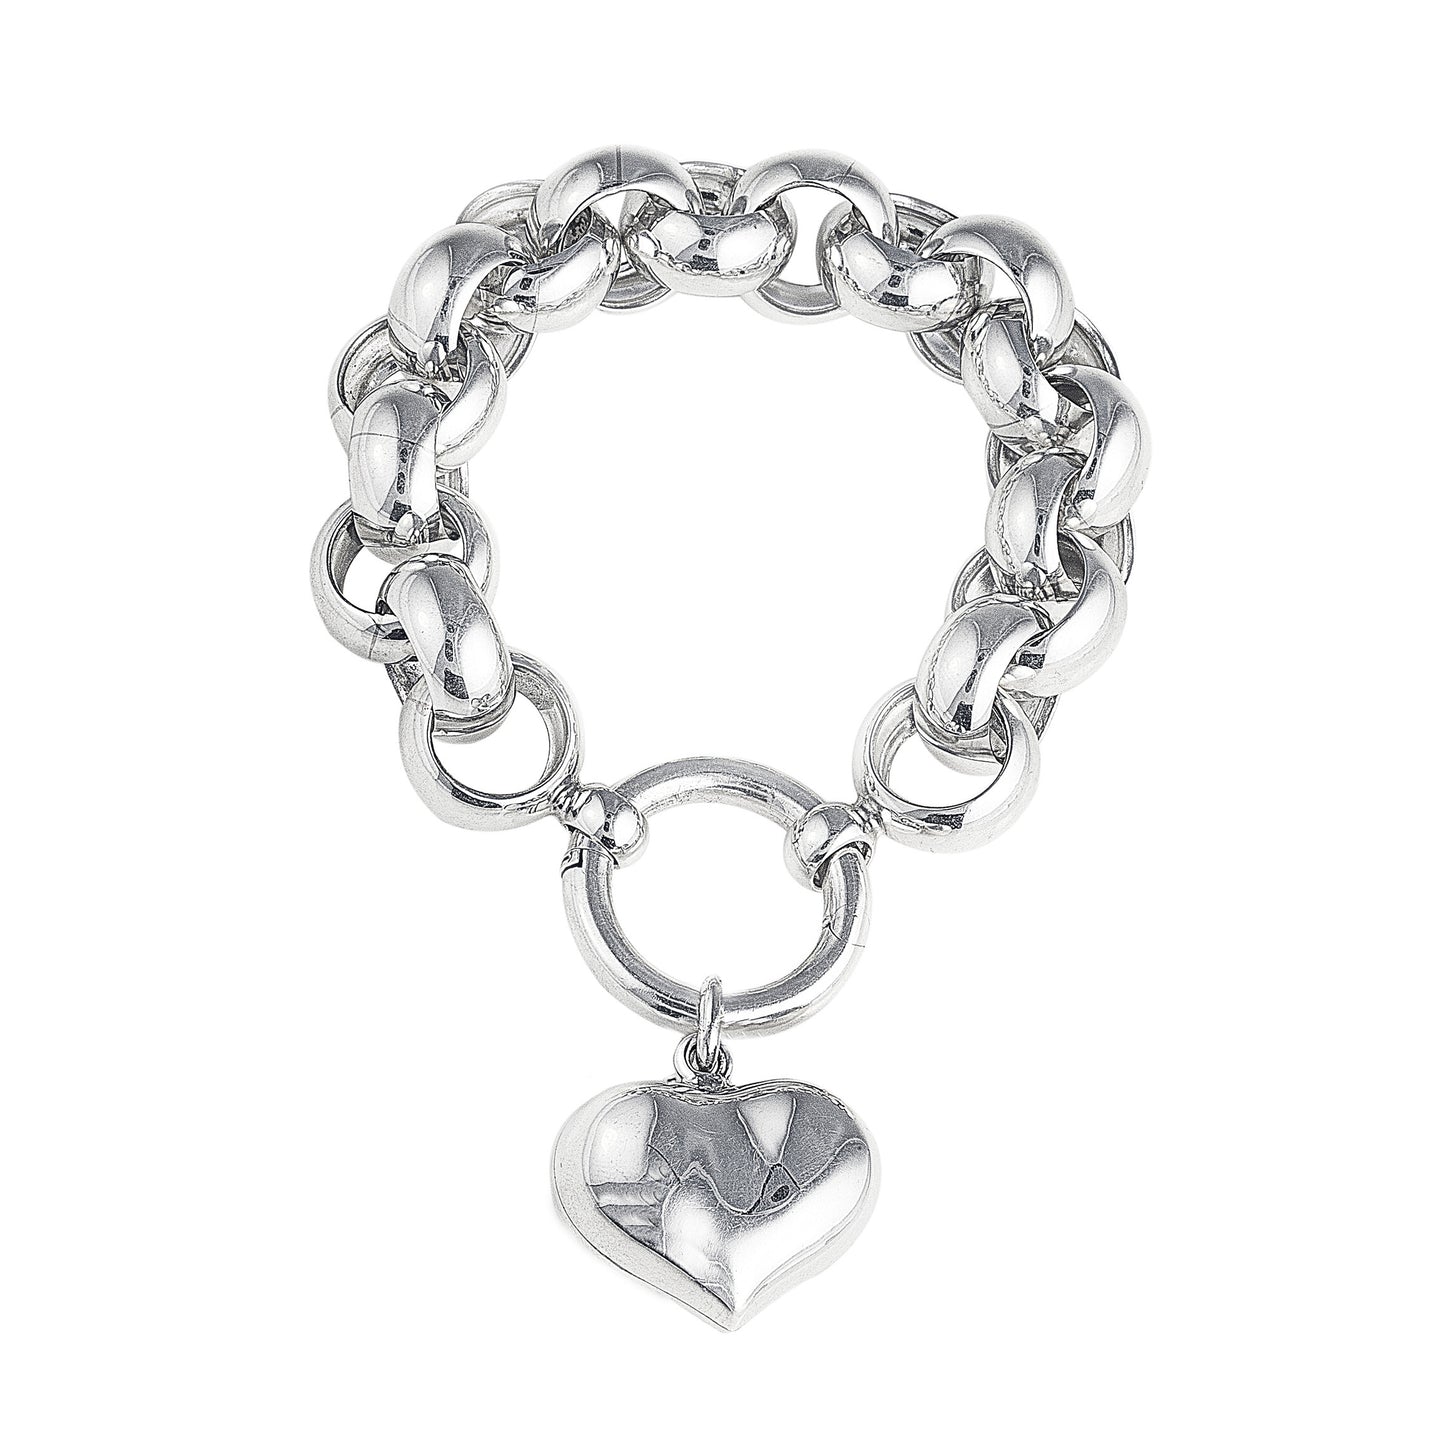 Chunky/Thick Belcher Style "European Love Story Bracelet" in 925 Sterling Silver with Heart Charm. Worldwide shipping